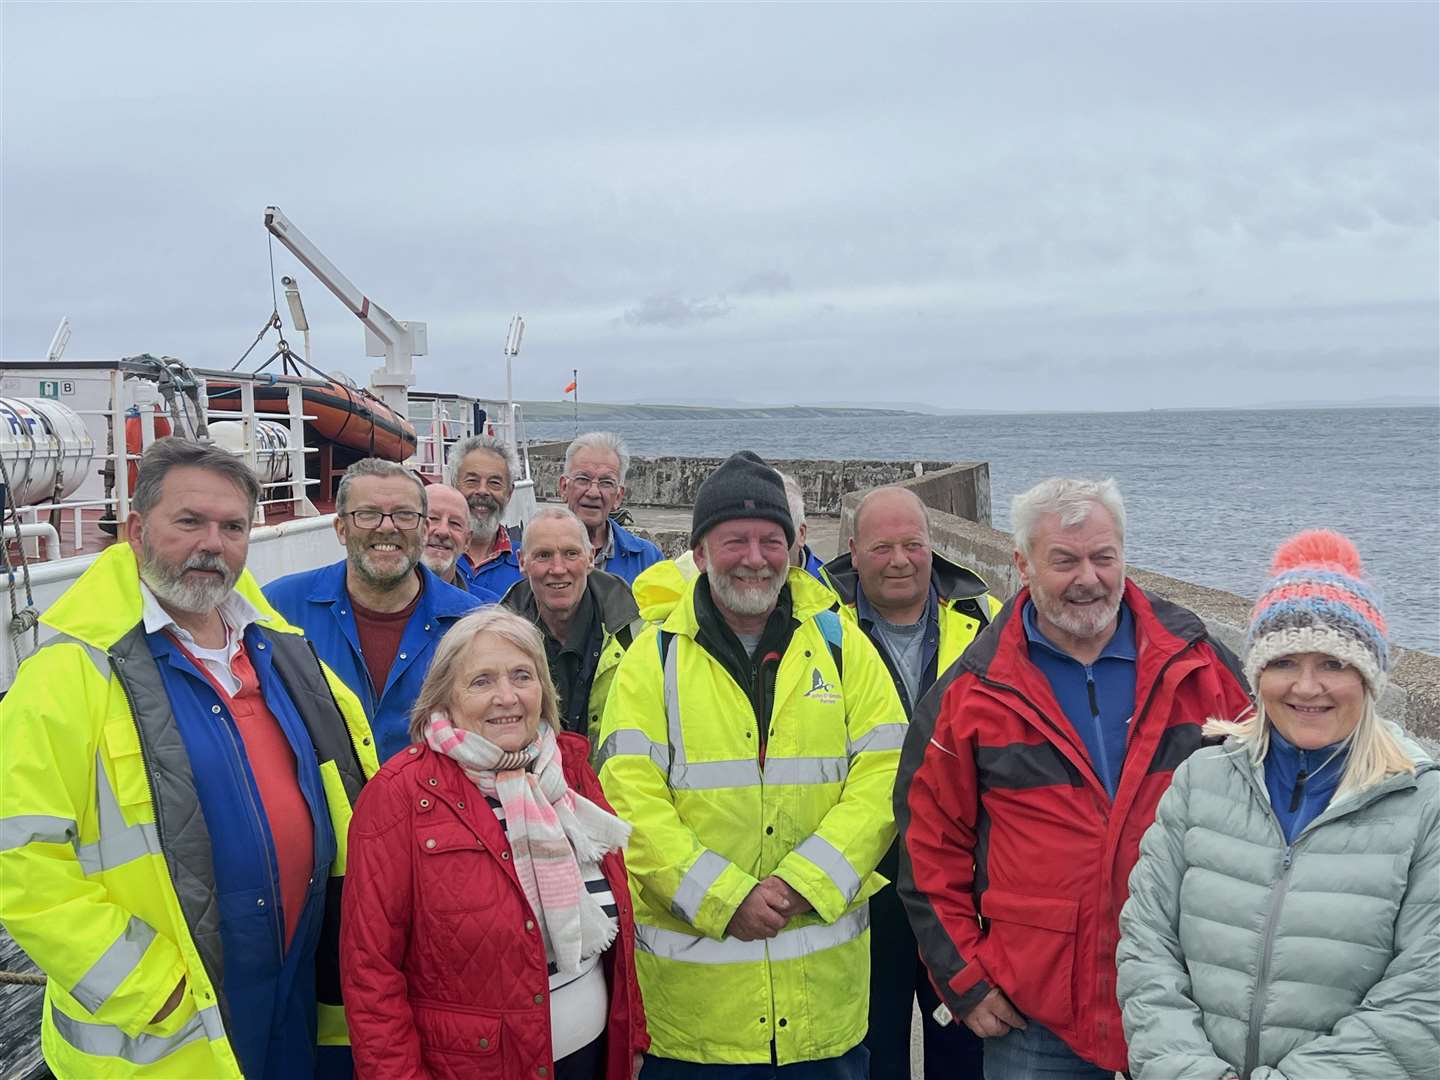 Members of the team at John O'Groats Ferries alongside the Pentland Venture on Wednesday, the last day of sailing. Picture: Fred Fermor